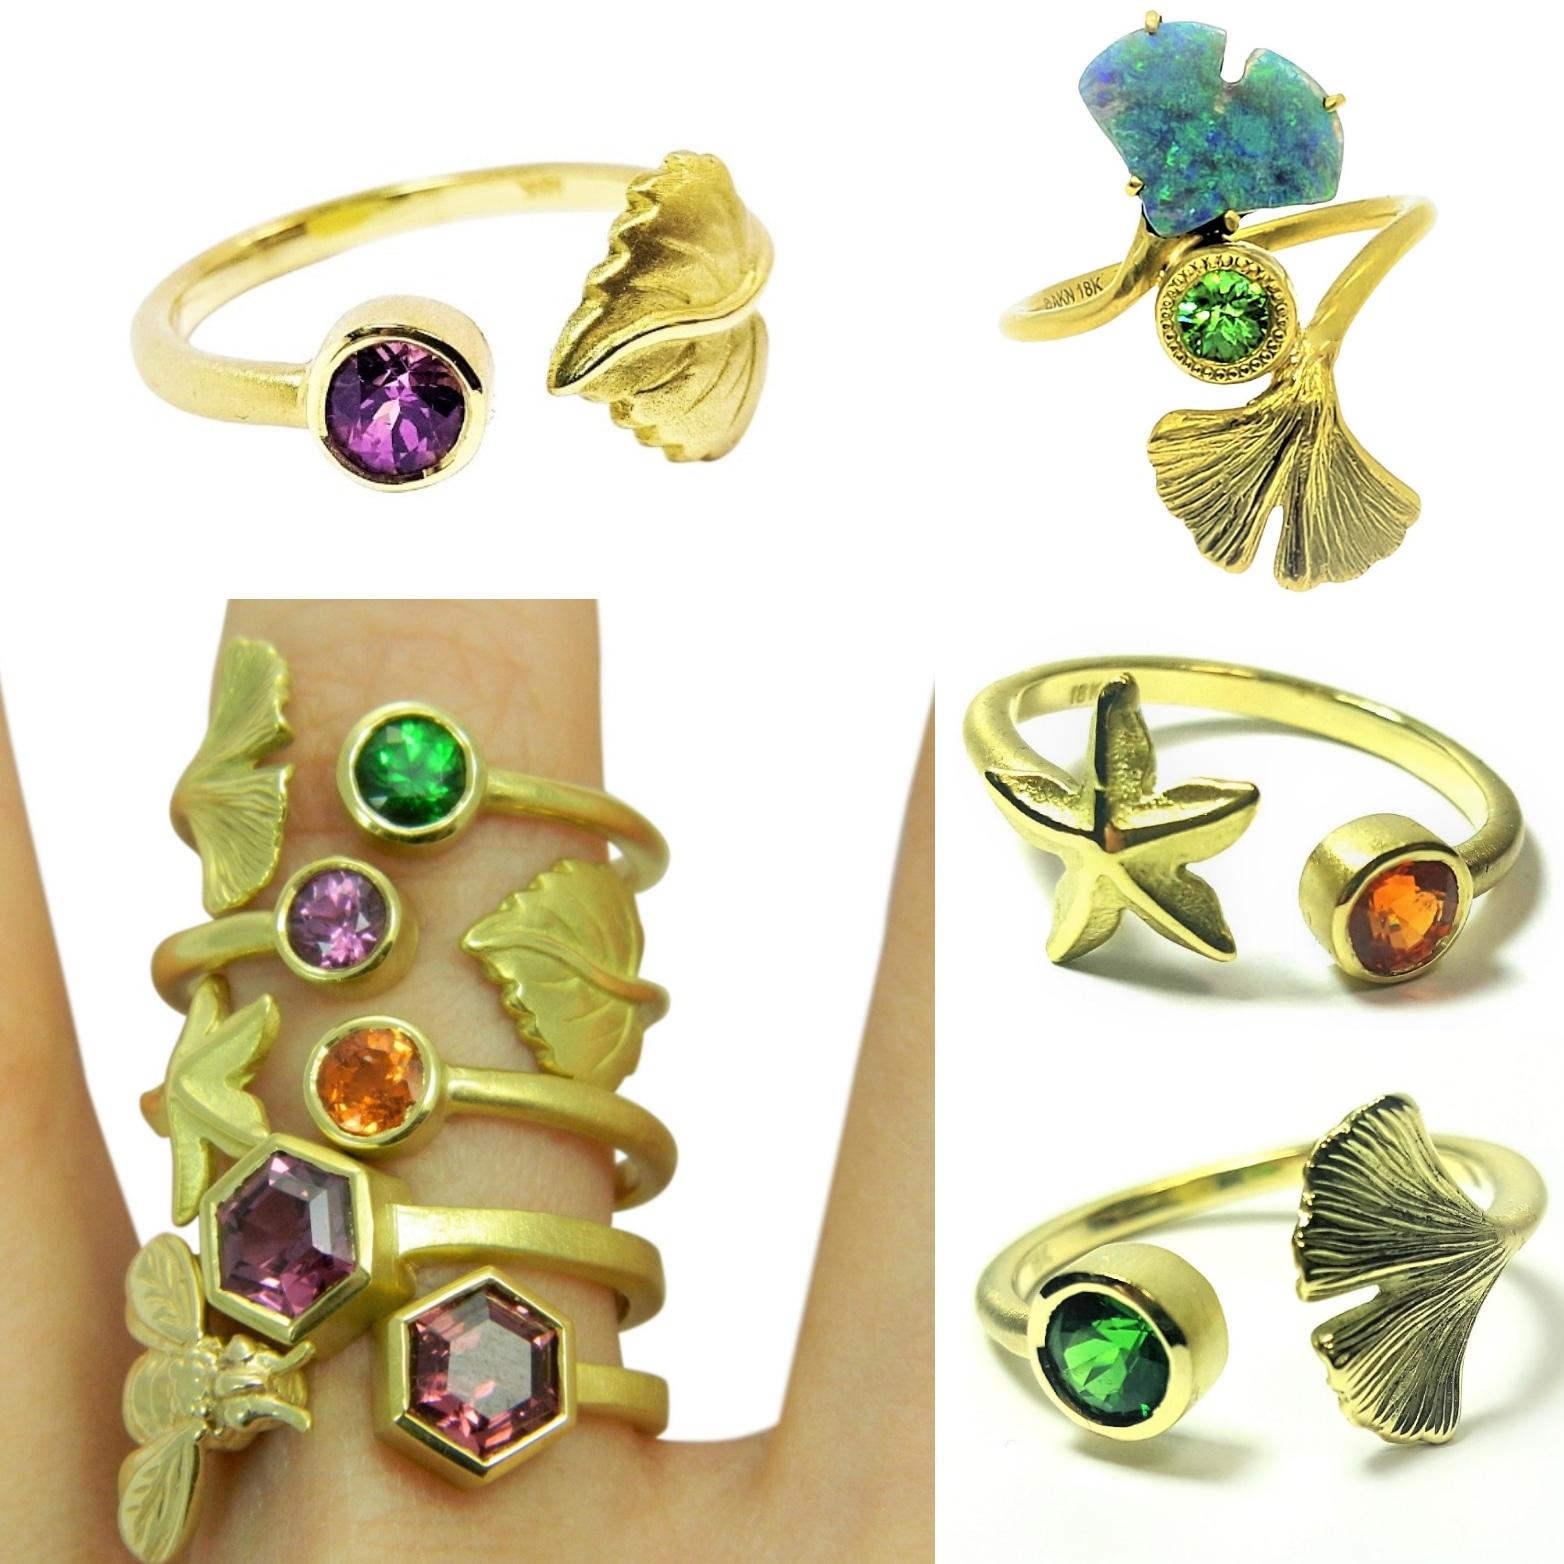 Artisan Stackette 18K Gold Gemstone Ring Collection highlighting the Aspen Leaf Style For Sale